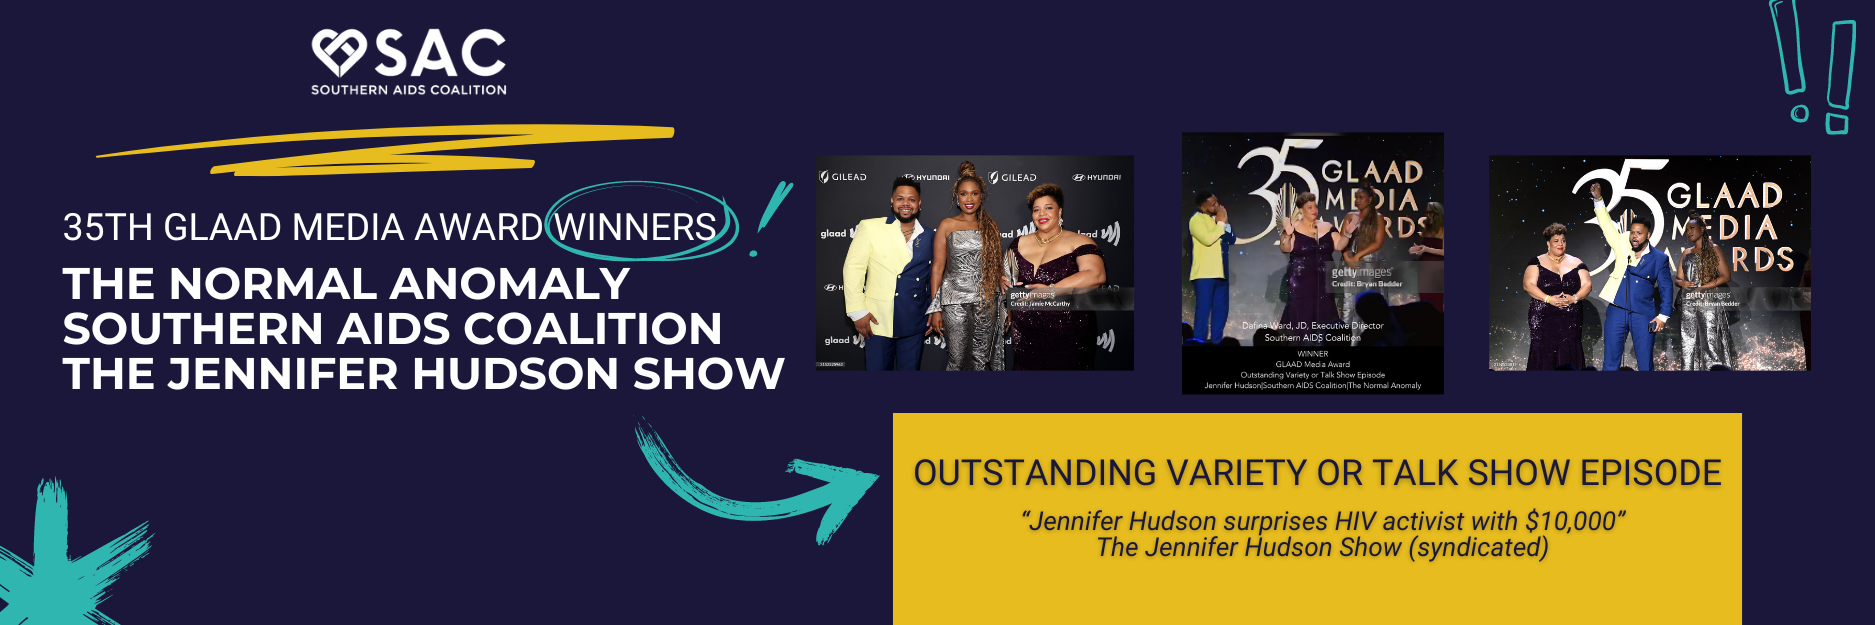 35th GLAAD Media Award Winners The Normal Anomaly, Southern AIDS Coalition, The Jennifer Hudson Show, Outstanding Variety or Talk Show Episode, Jennifer Hudson surprises H-I-V activist with $10,000 The Jennifer Hudson Show (syndicated)